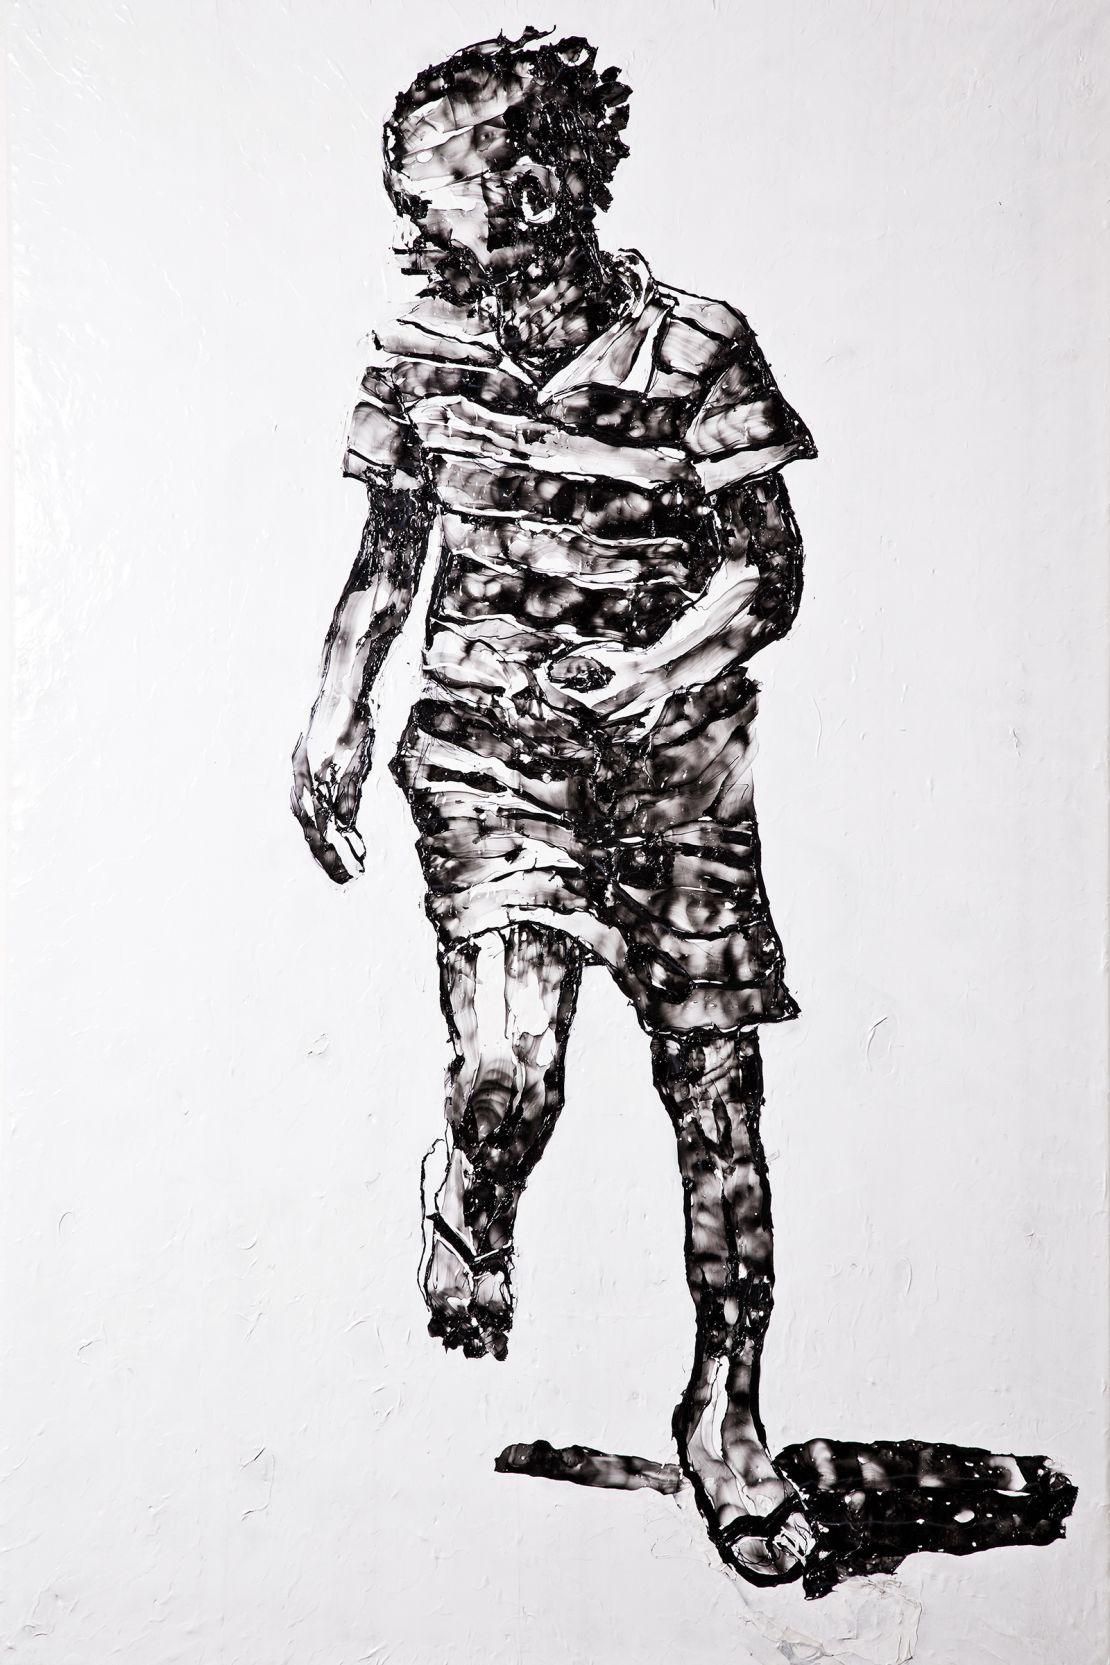 A work by Buthelezi called "Street Soccer."